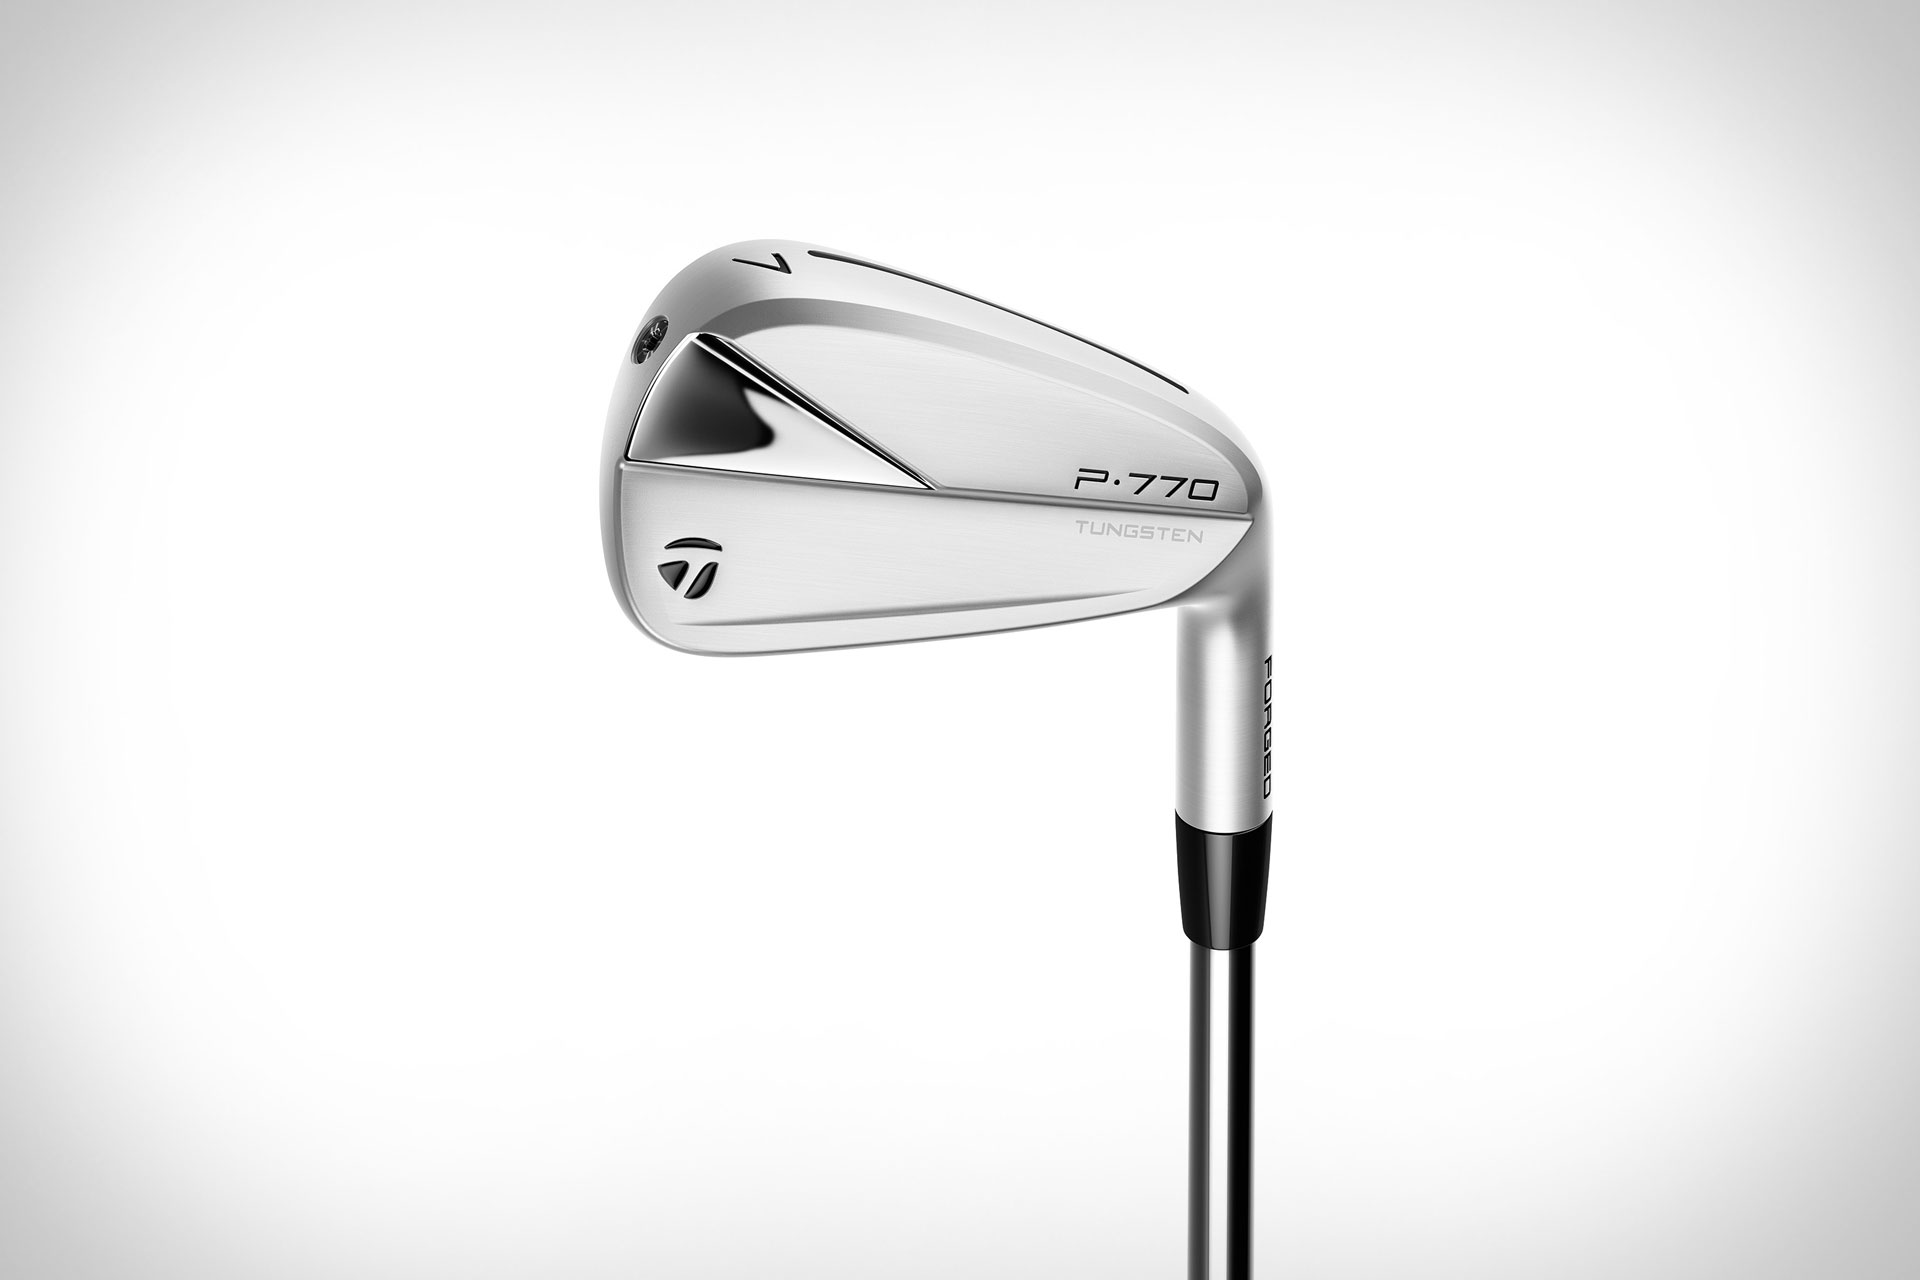 2023 TaylorMade P·770 Irons | Uncrate